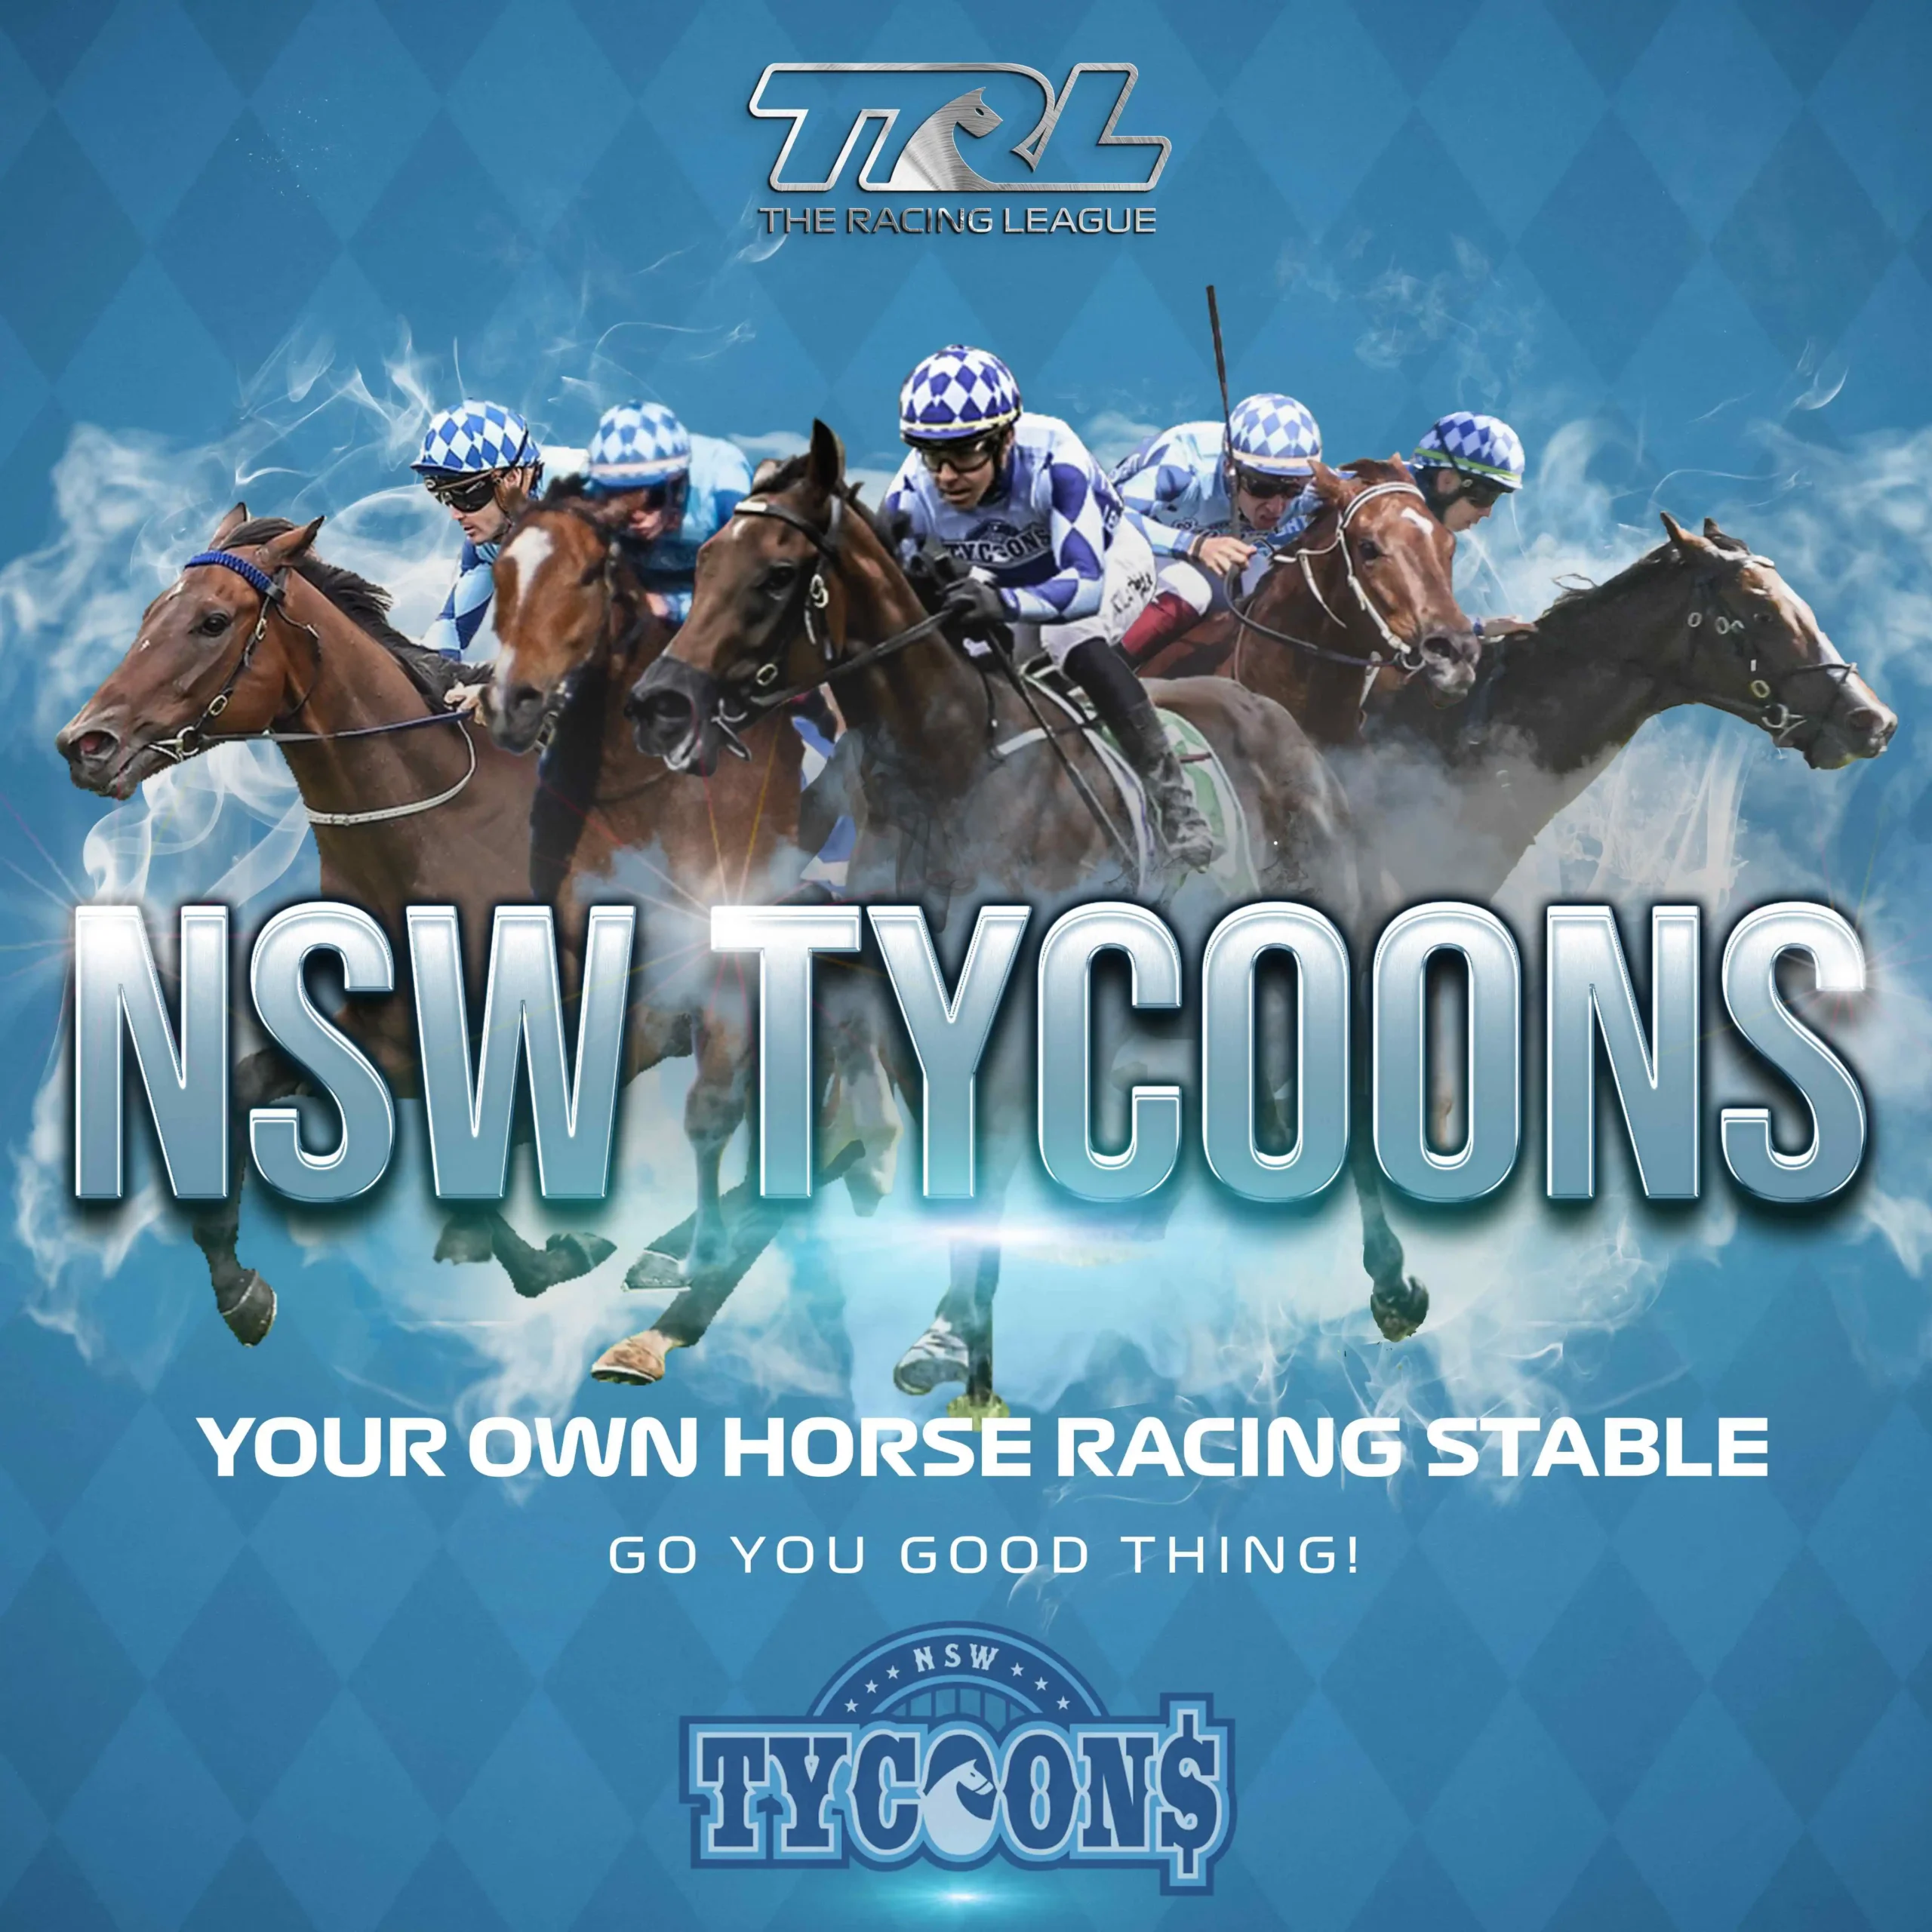 The Racing League NSW Tycoons